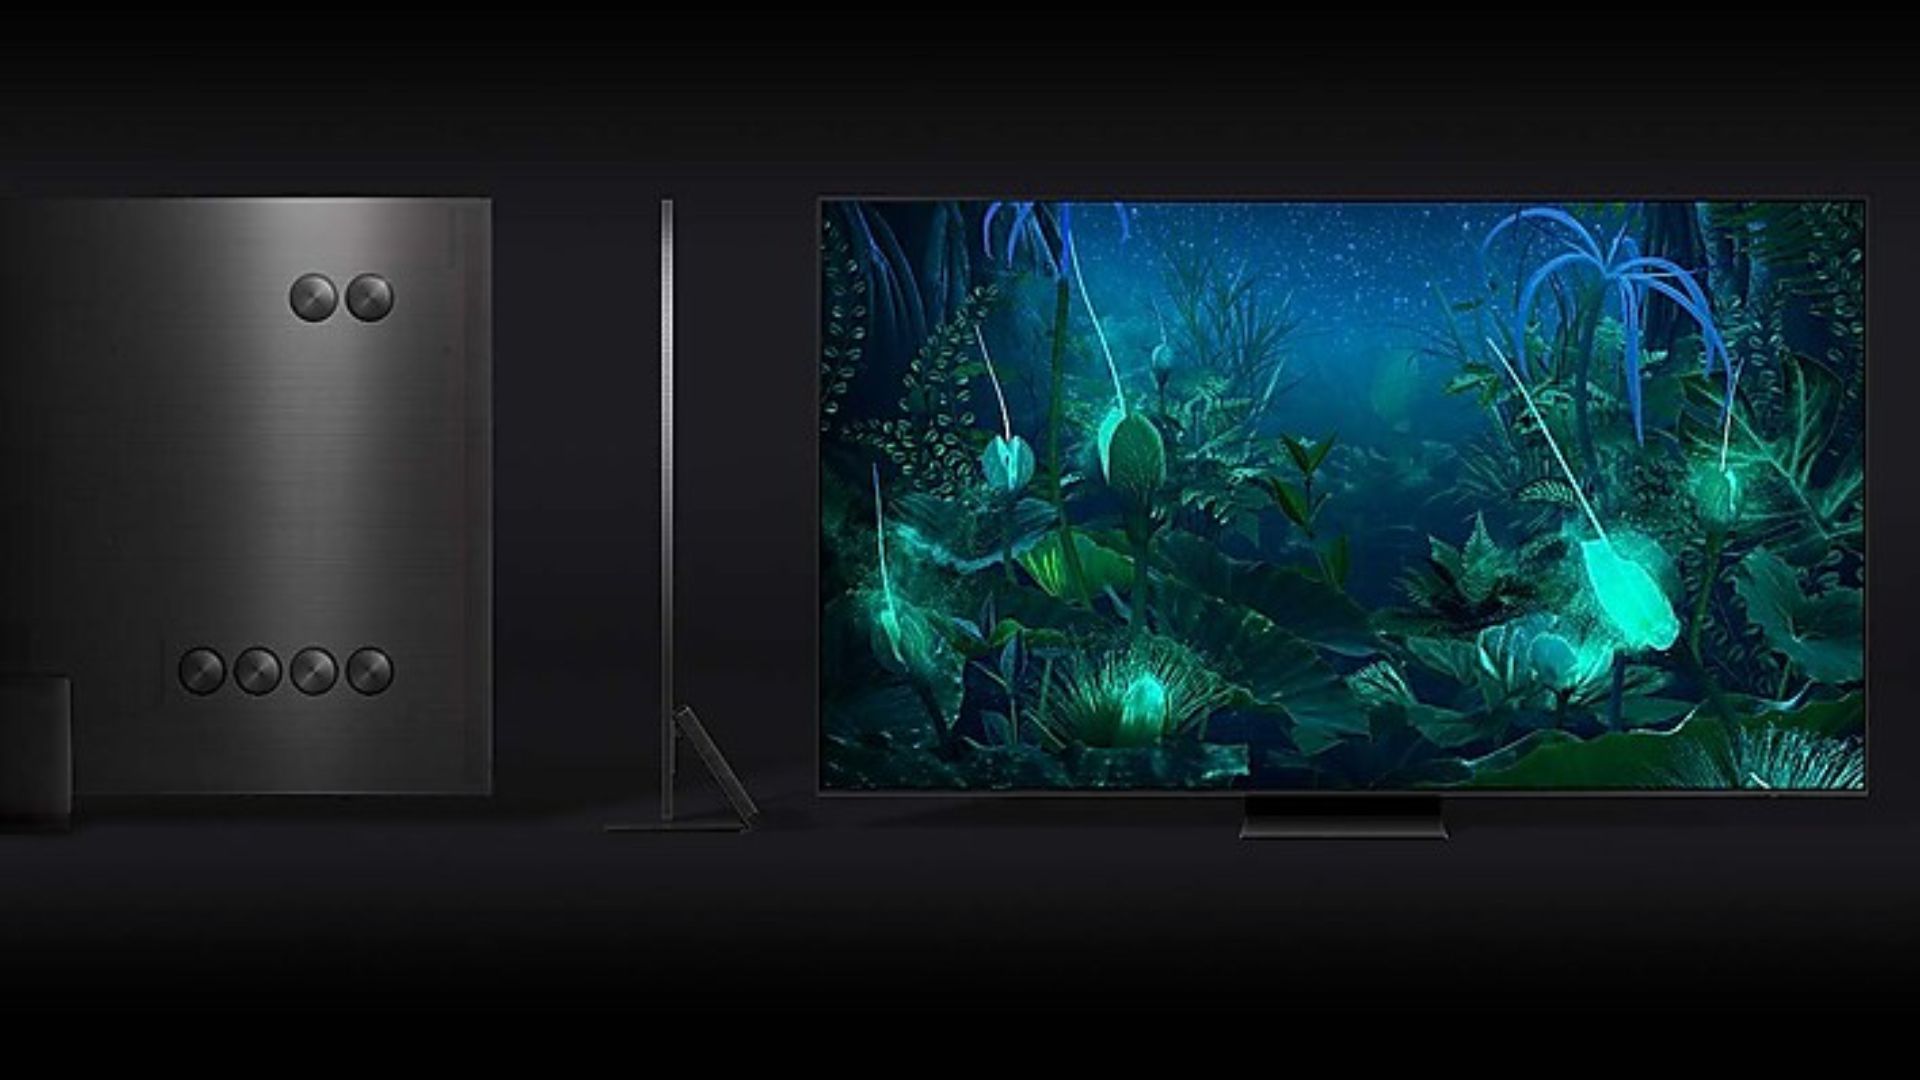 Samsung unveils flagship 98-inch Neo-QLED 8K TV with Dolby Atmos system –  and it's eye-wateringly expensive